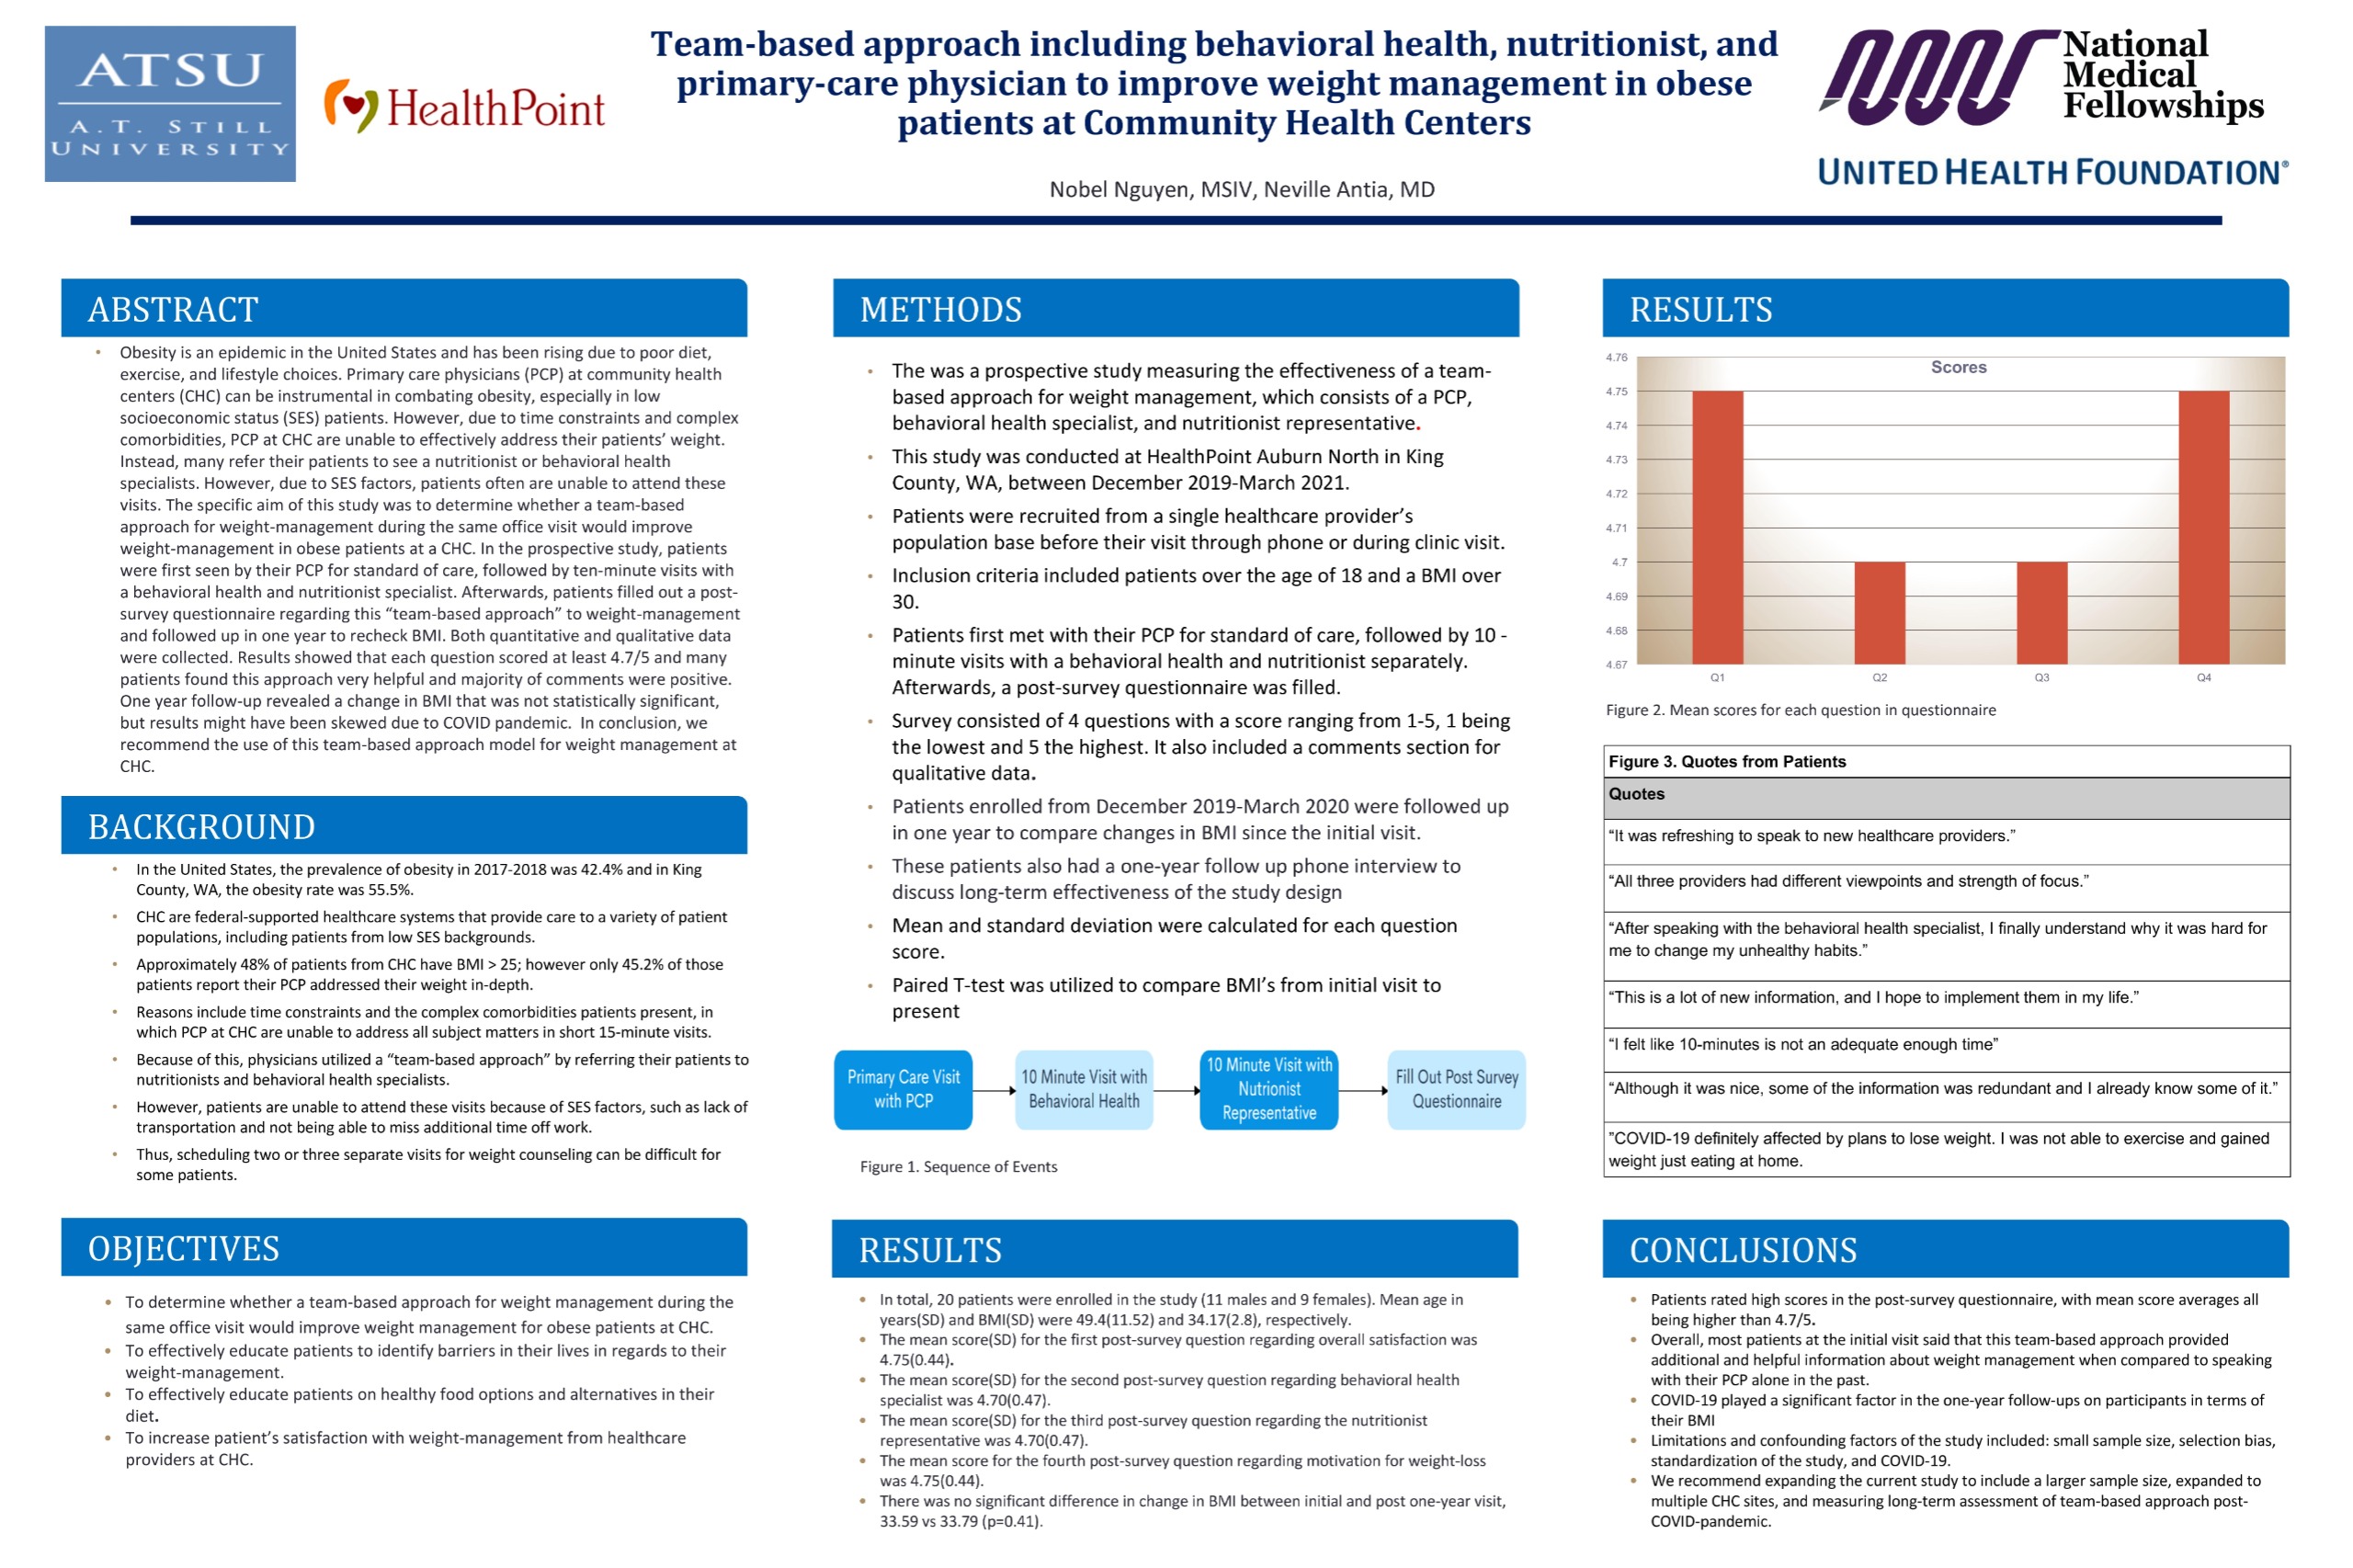 Team-Based Approach Including Behavioral Health, Nutritionist, and Primary-Care Physician to Improve Weight Management in Obese Patients at Community Health Centers icon